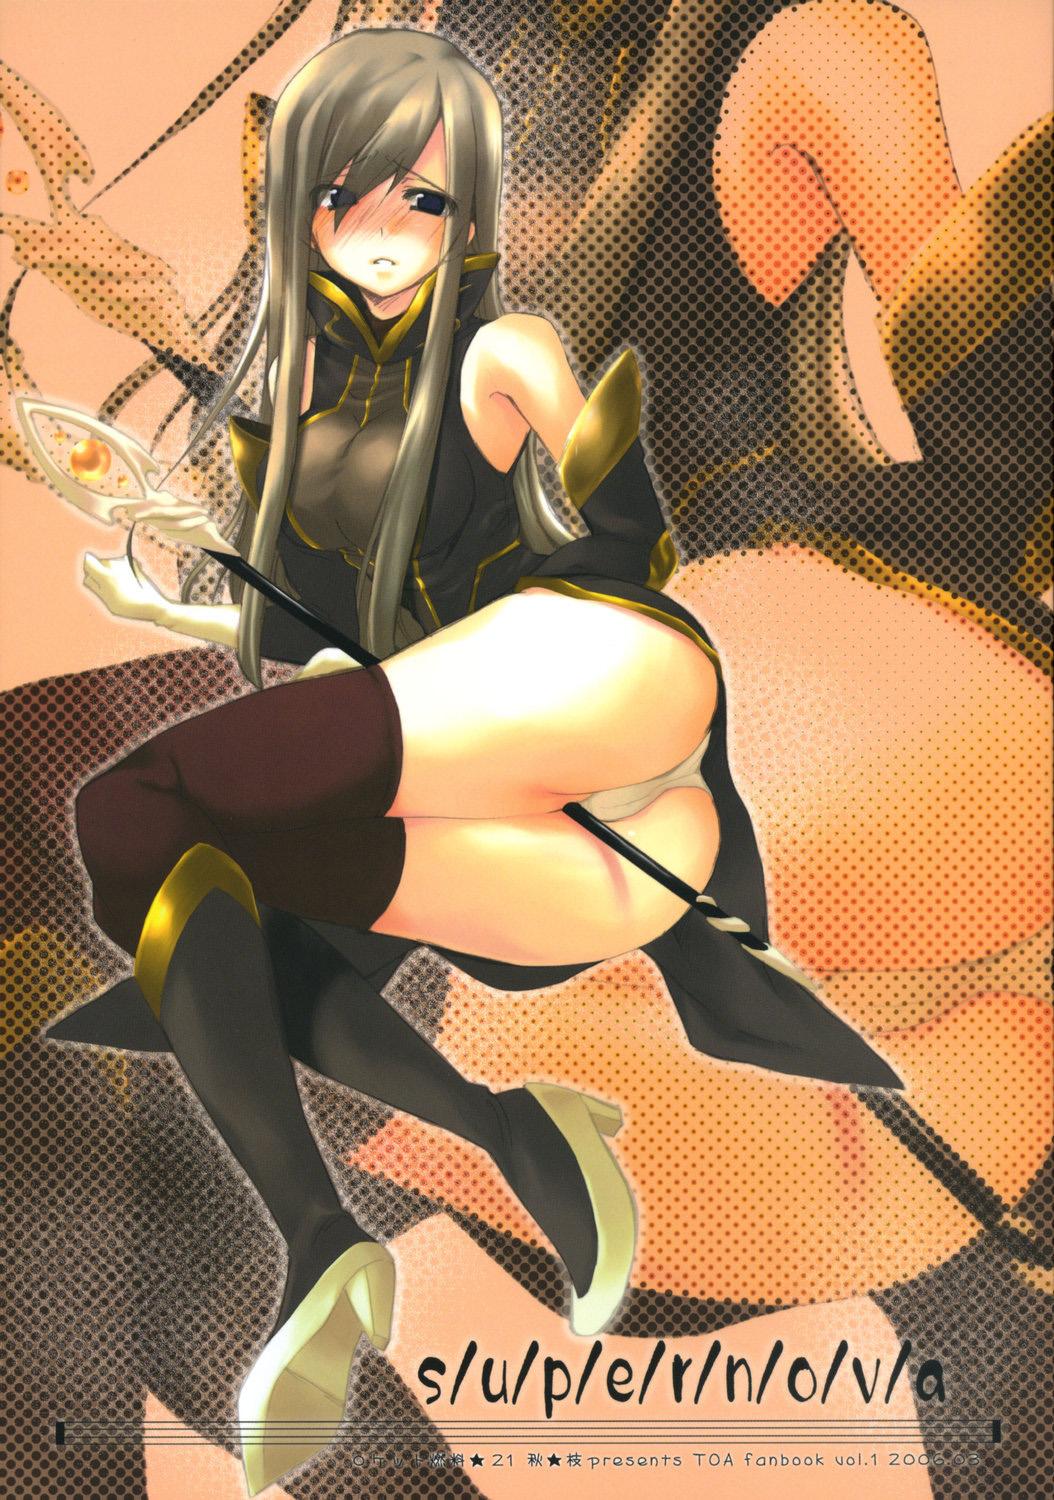 Blackcocks S/u/p/e/r/n/o/v/a - Tales of the abyss Boobies - Picture 1